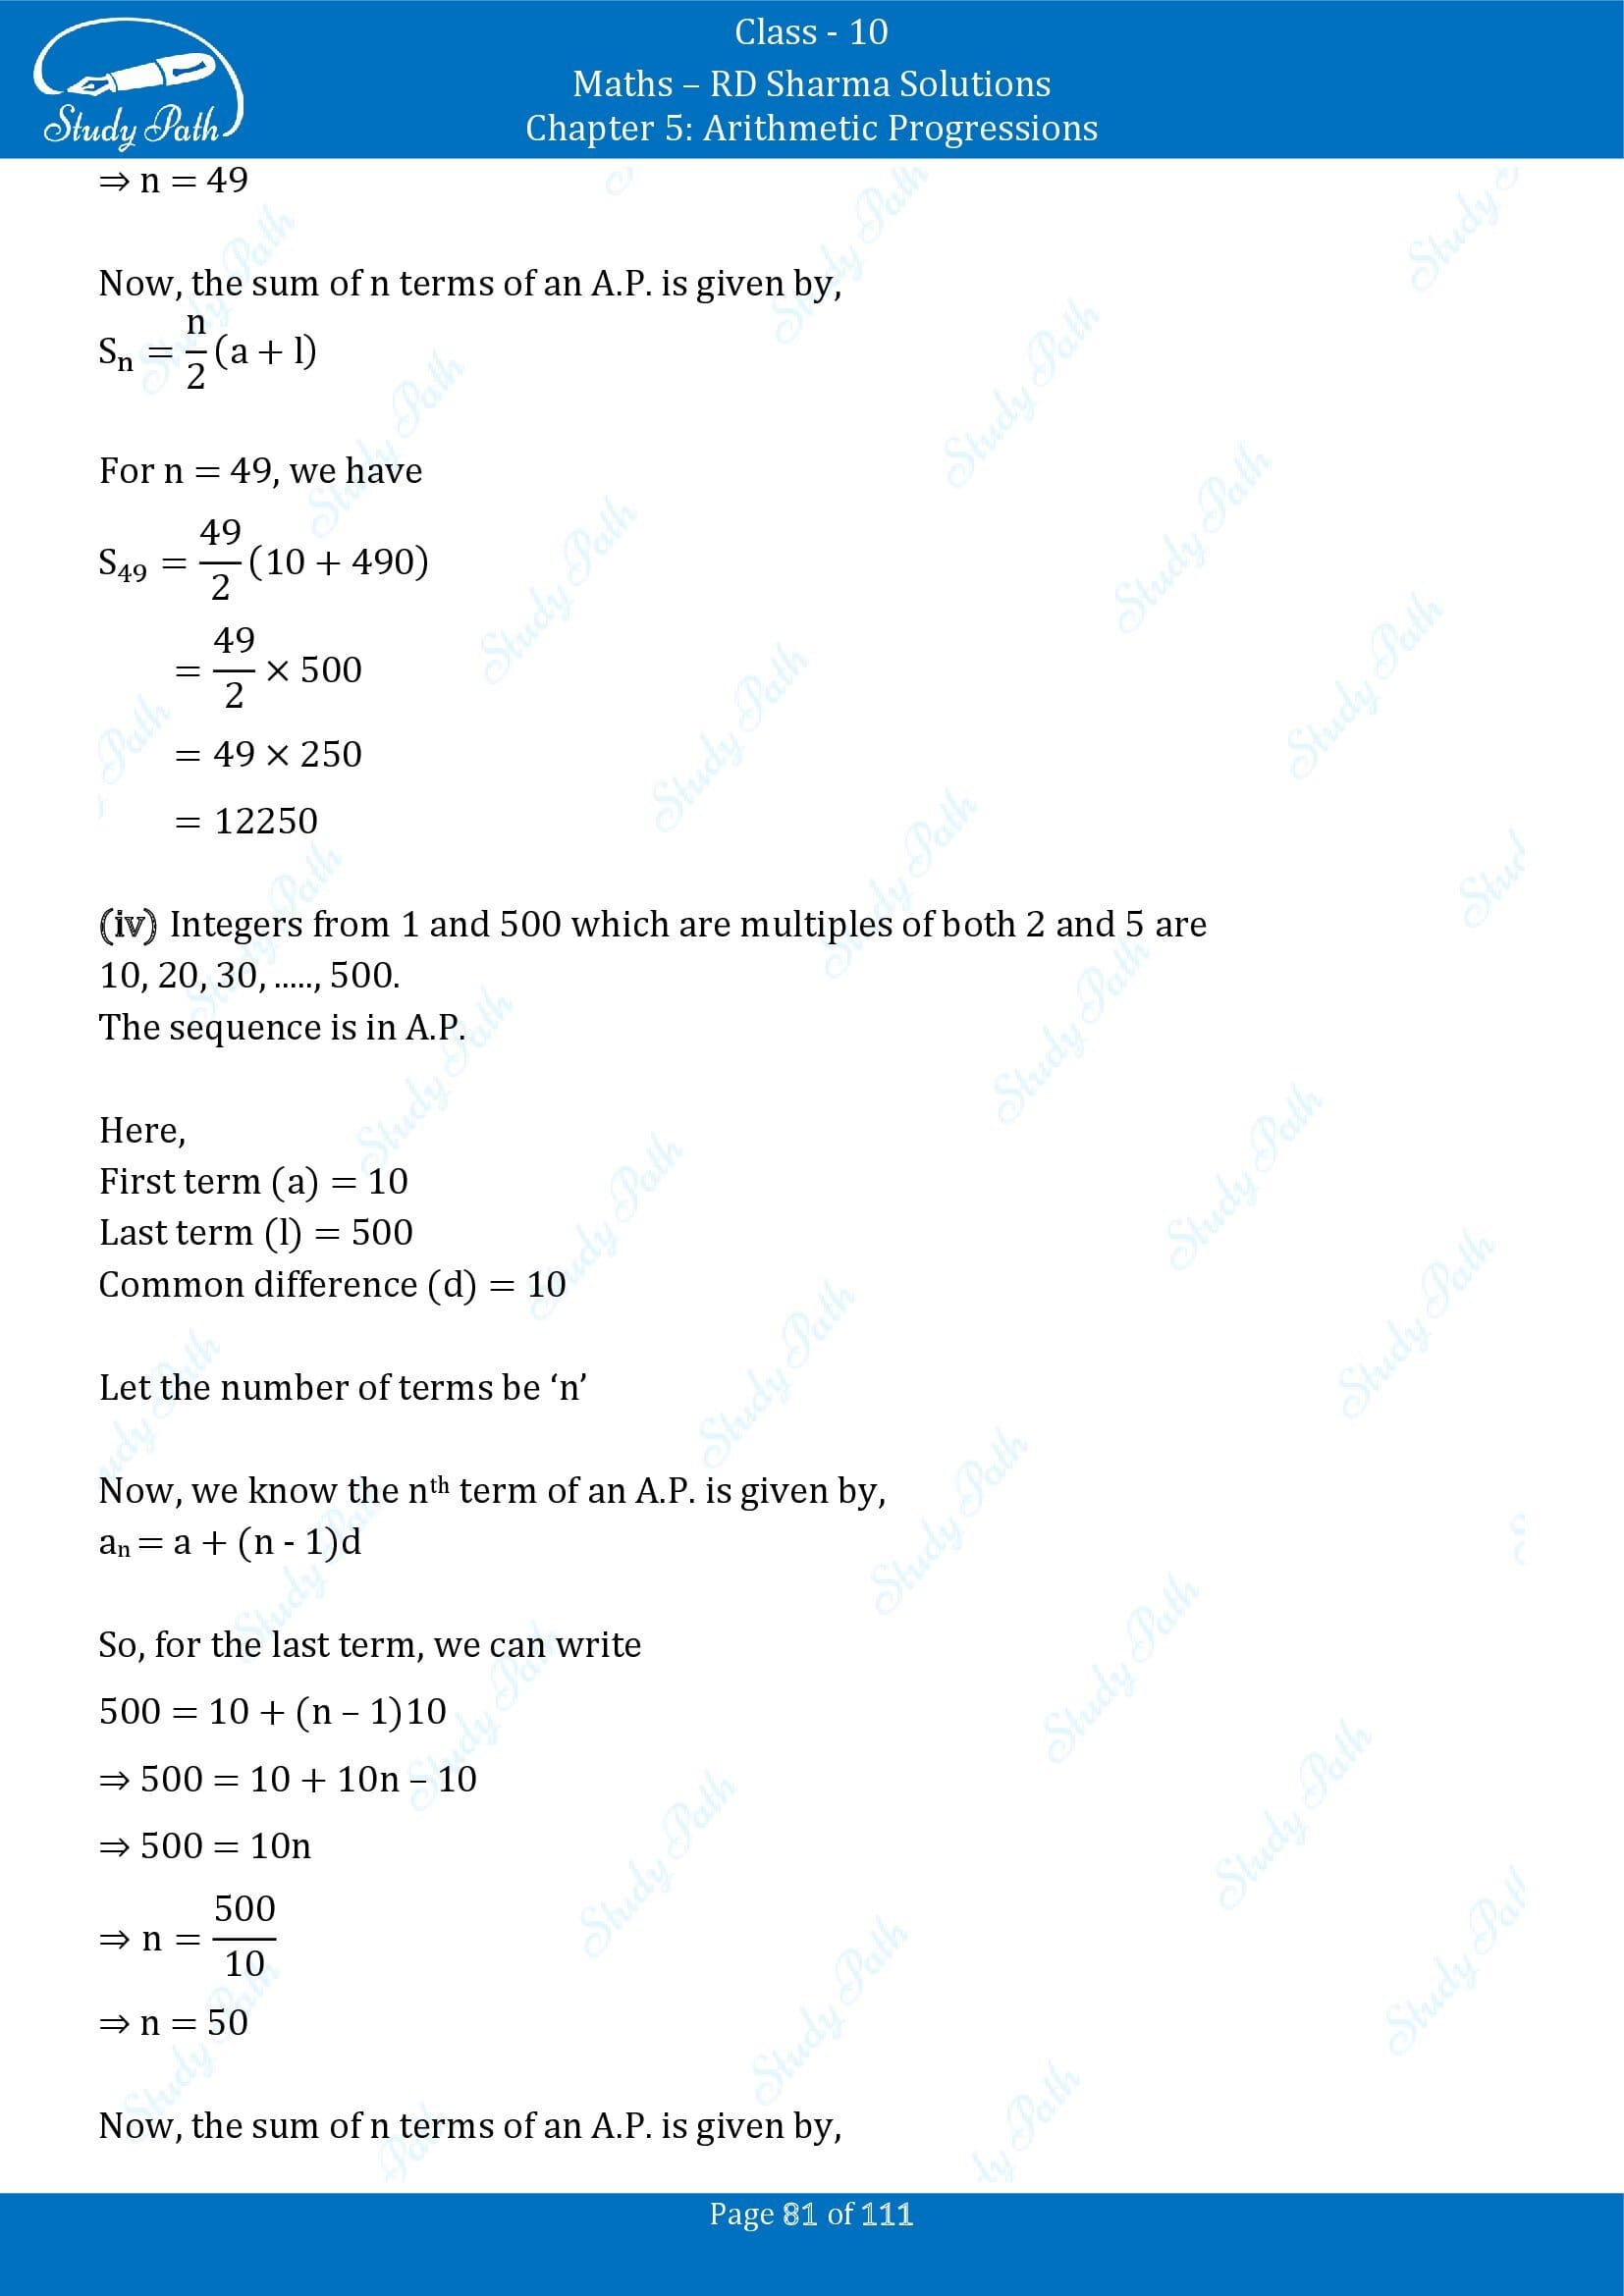 RD Sharma Solutions Class 10 Chapter 5 Arithmetic Progressions Exercise 5.6 00081